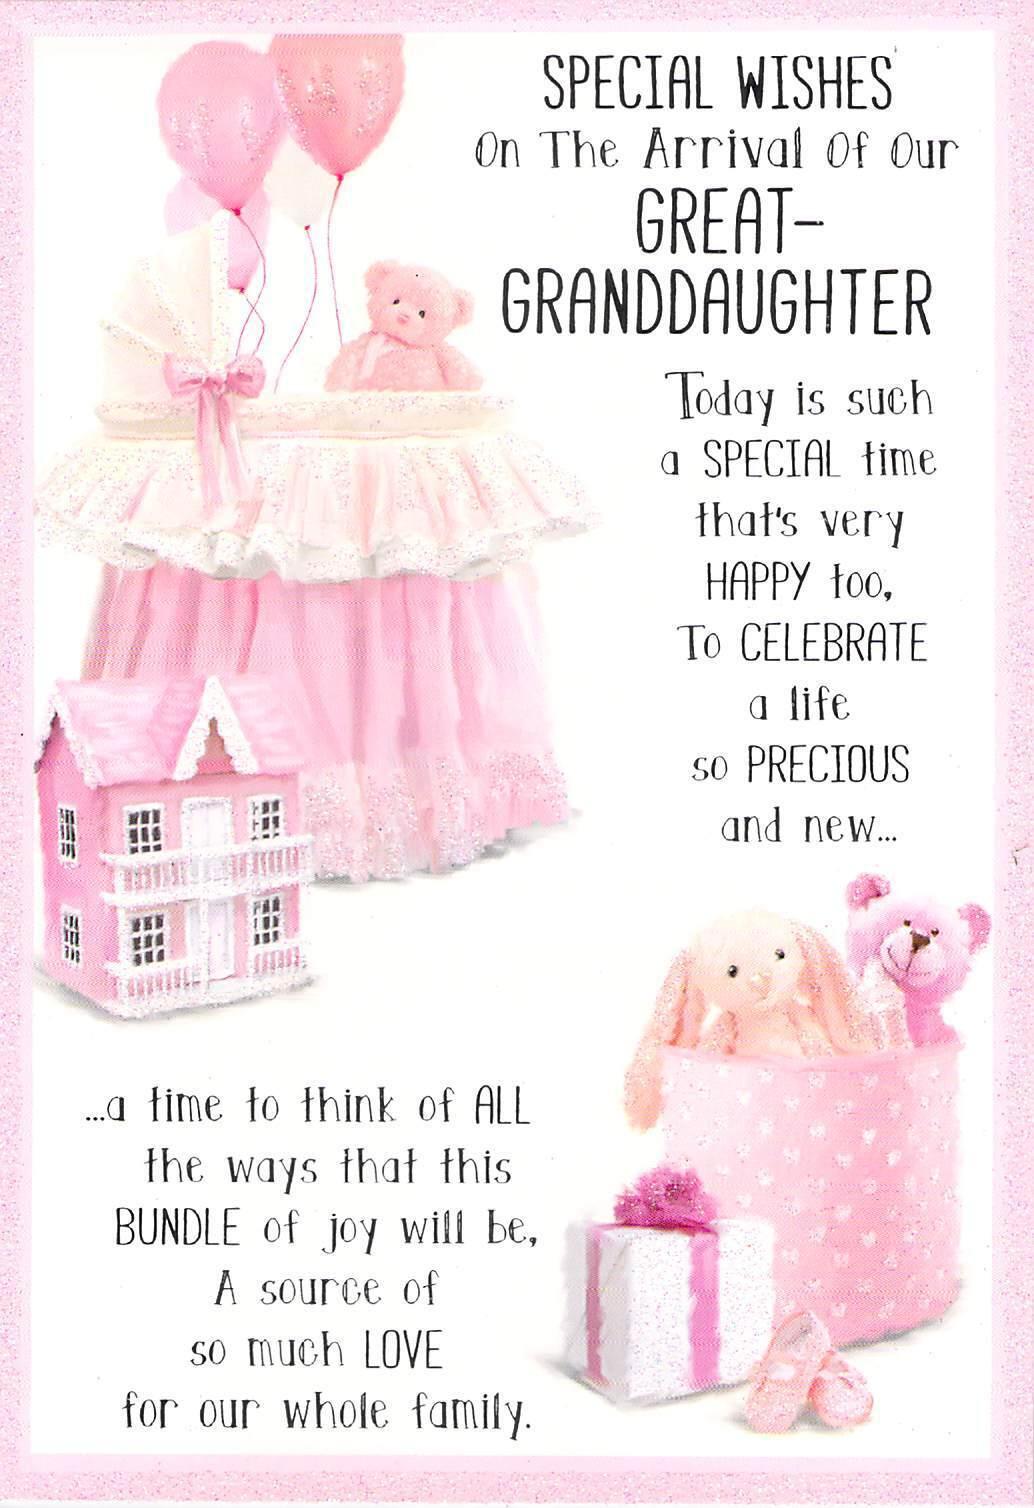 Birth - Great Granddaughter - Greeting Card - Free Postage